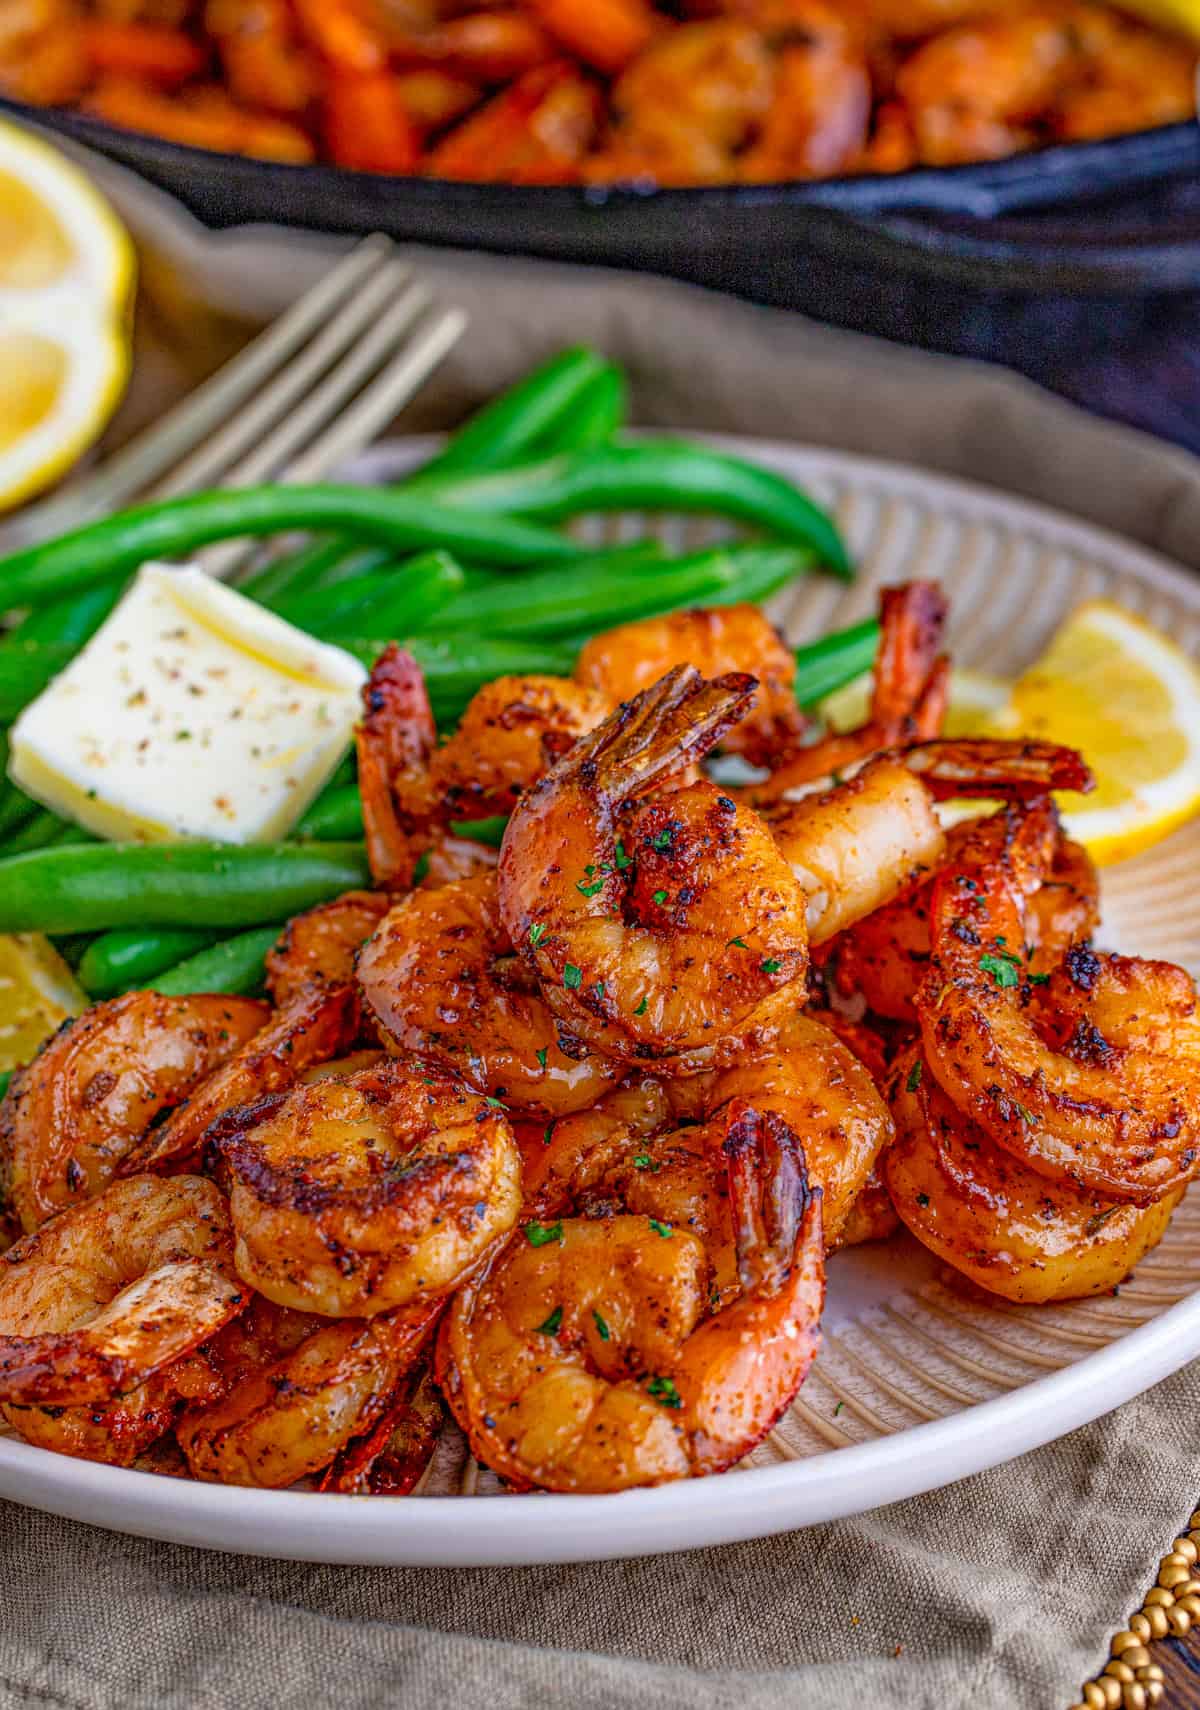 Blackened Shrimp on white plate served with some green beans on the side.